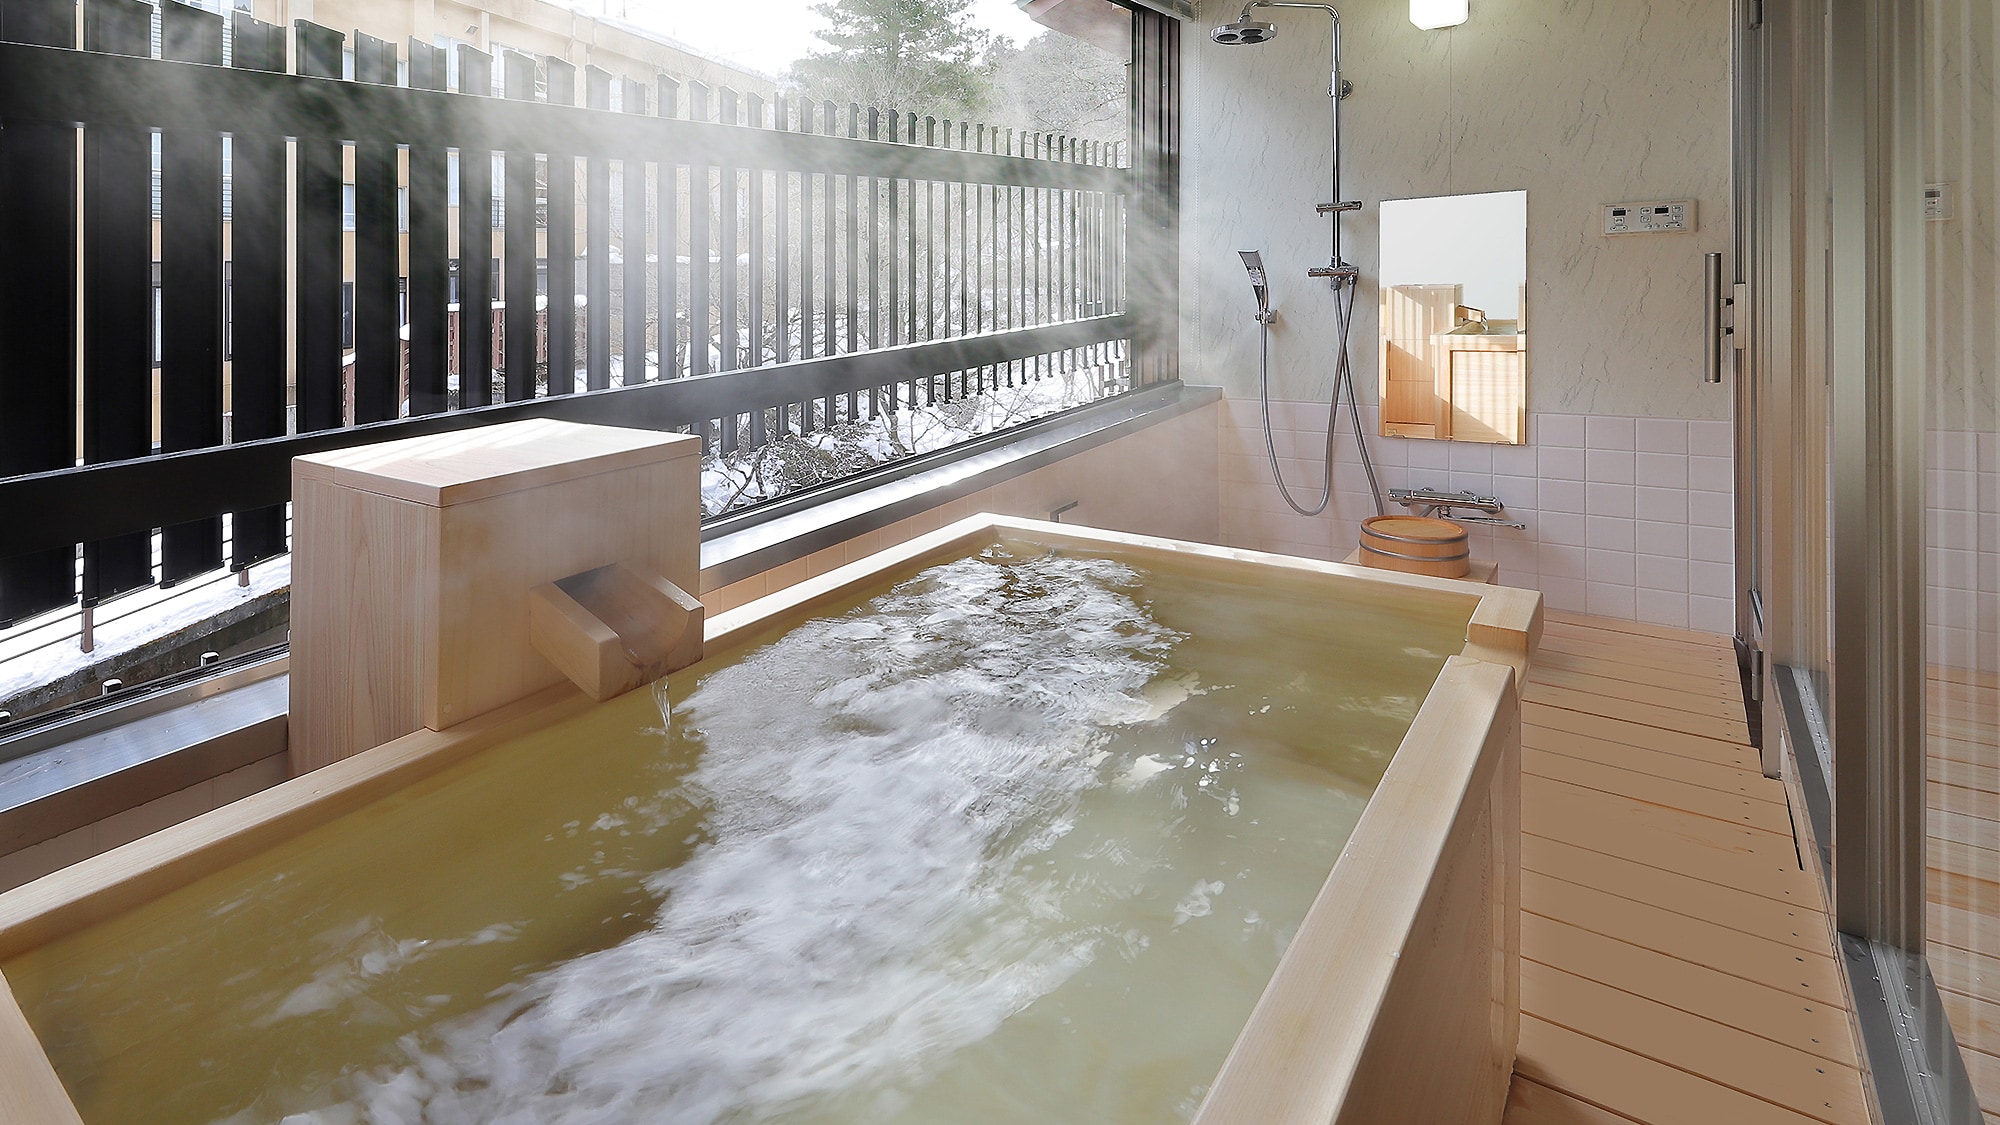 [Matsukaze] Modern Japanese-style room with a semi-open-air cypress bath that flows directly from the source